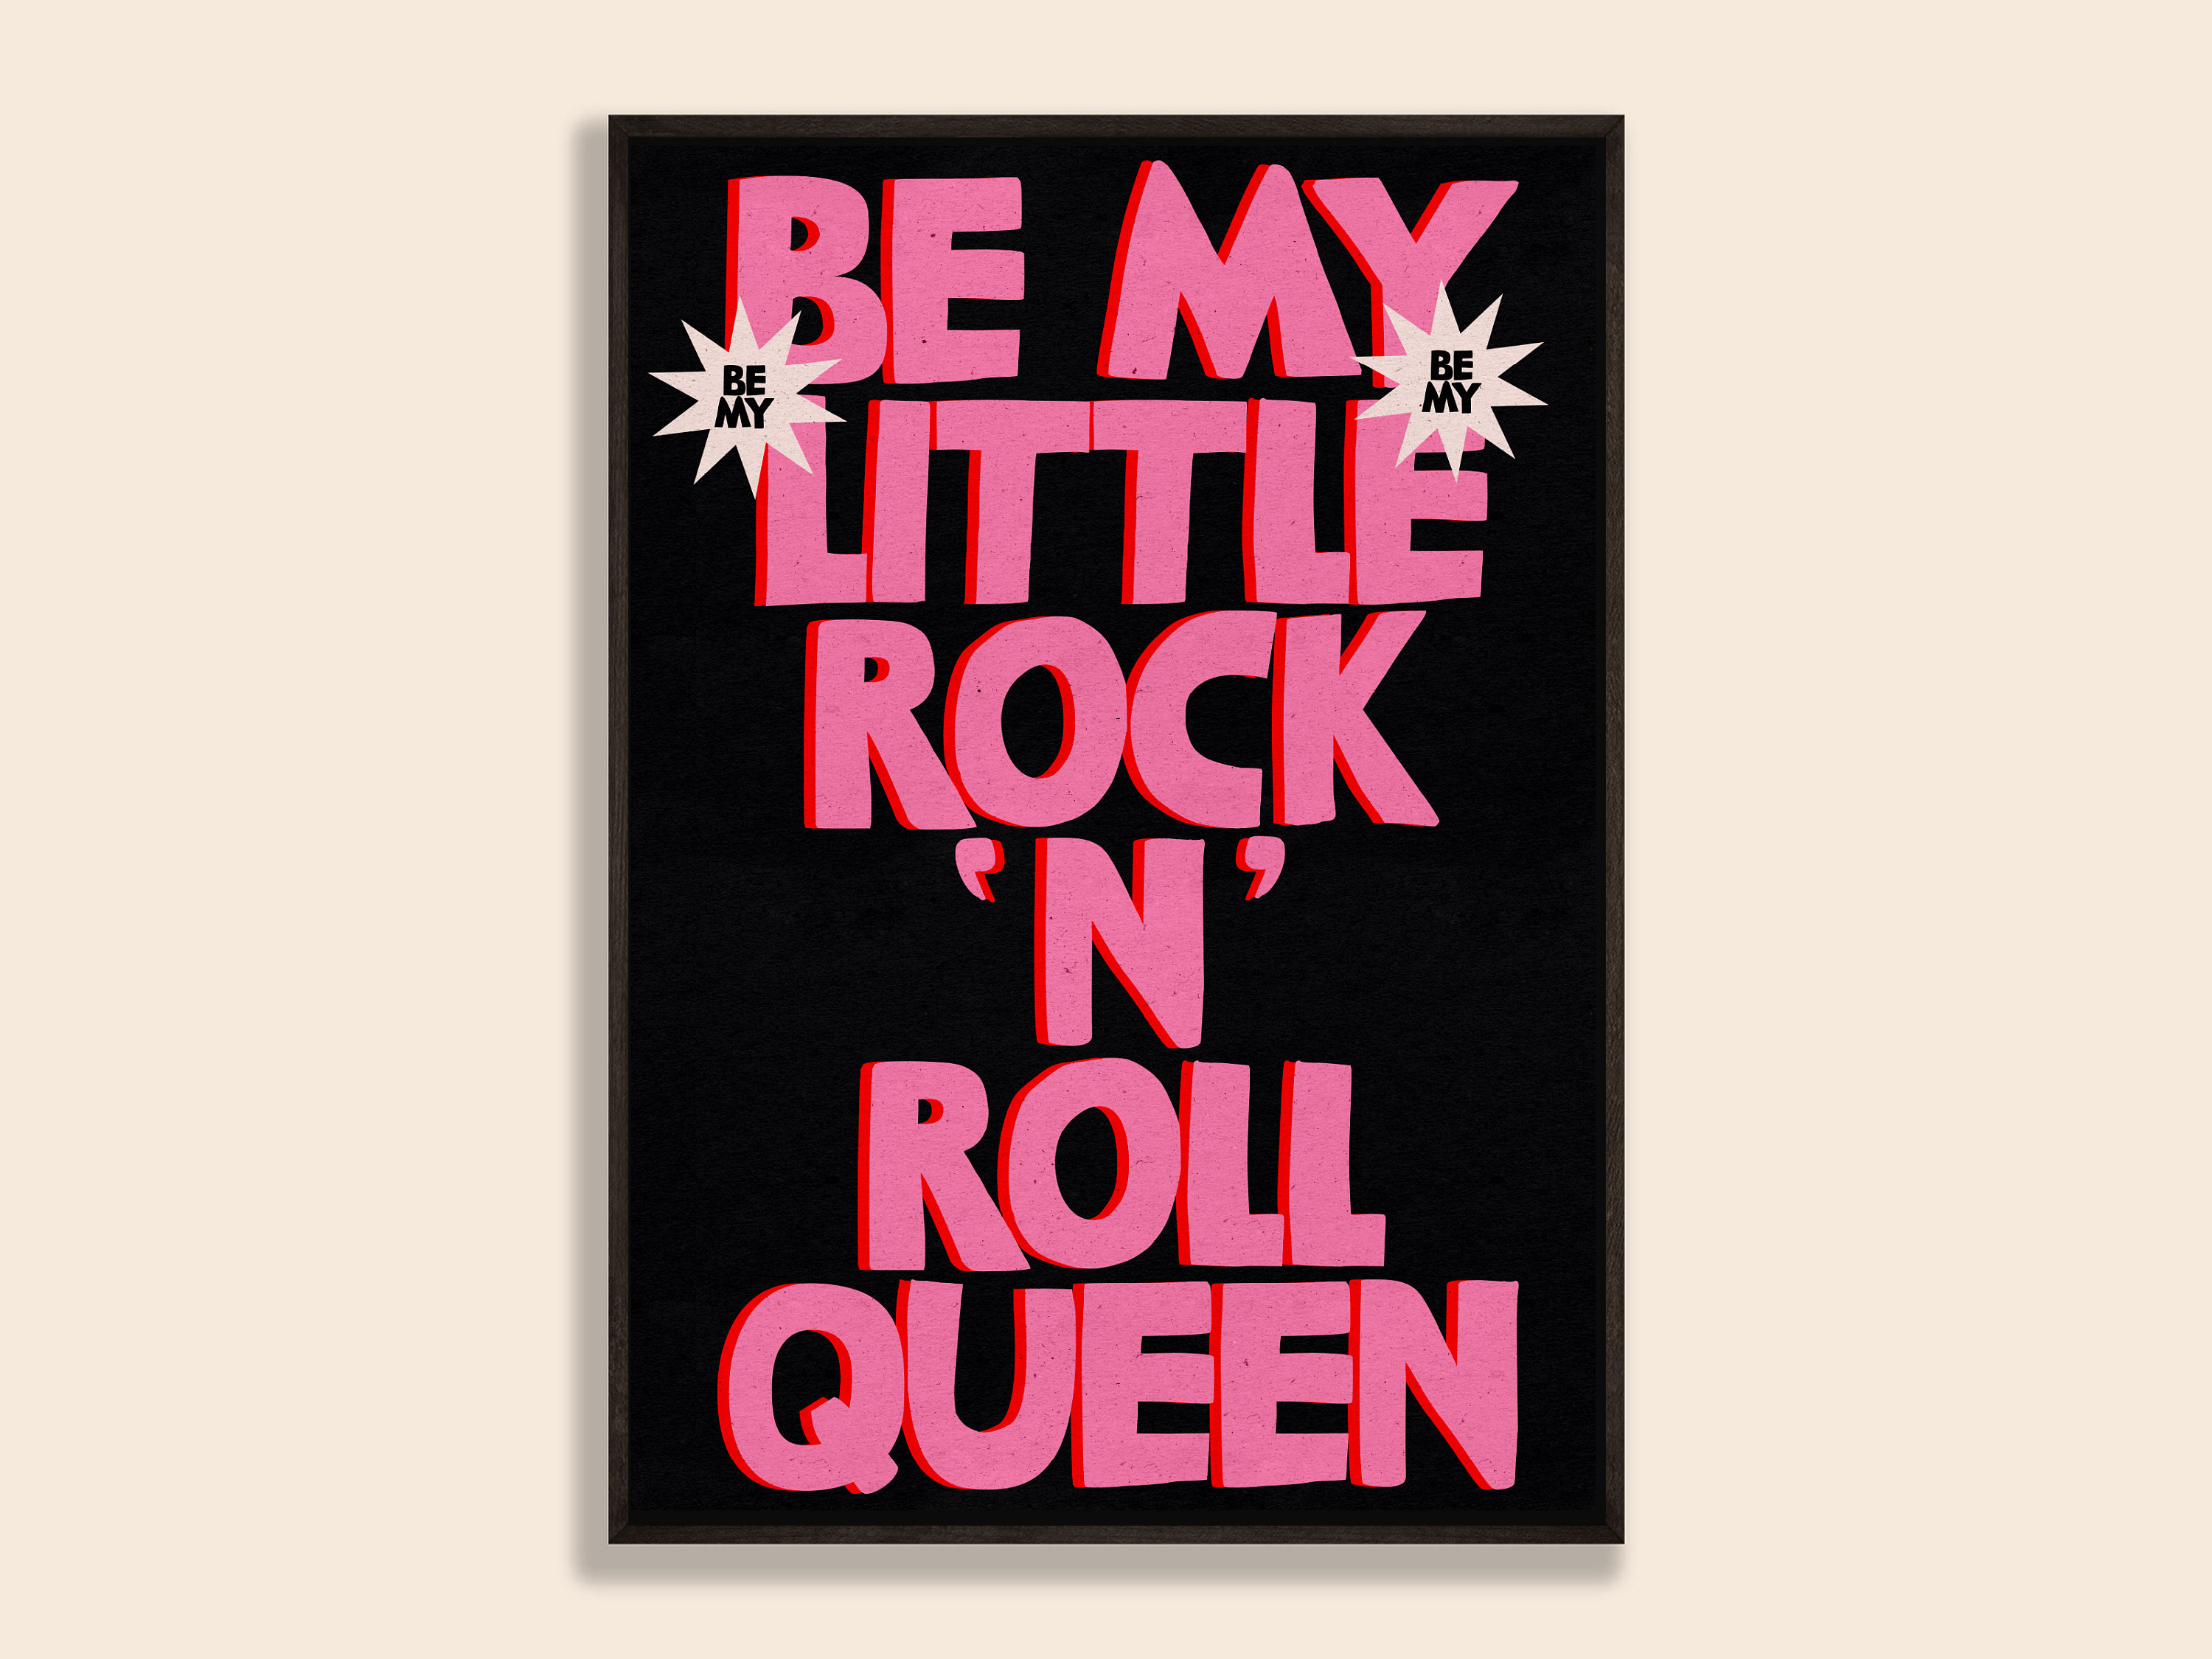 Keep Calm And Be My Rock-n-roll Queen Typography. Grunge Poster